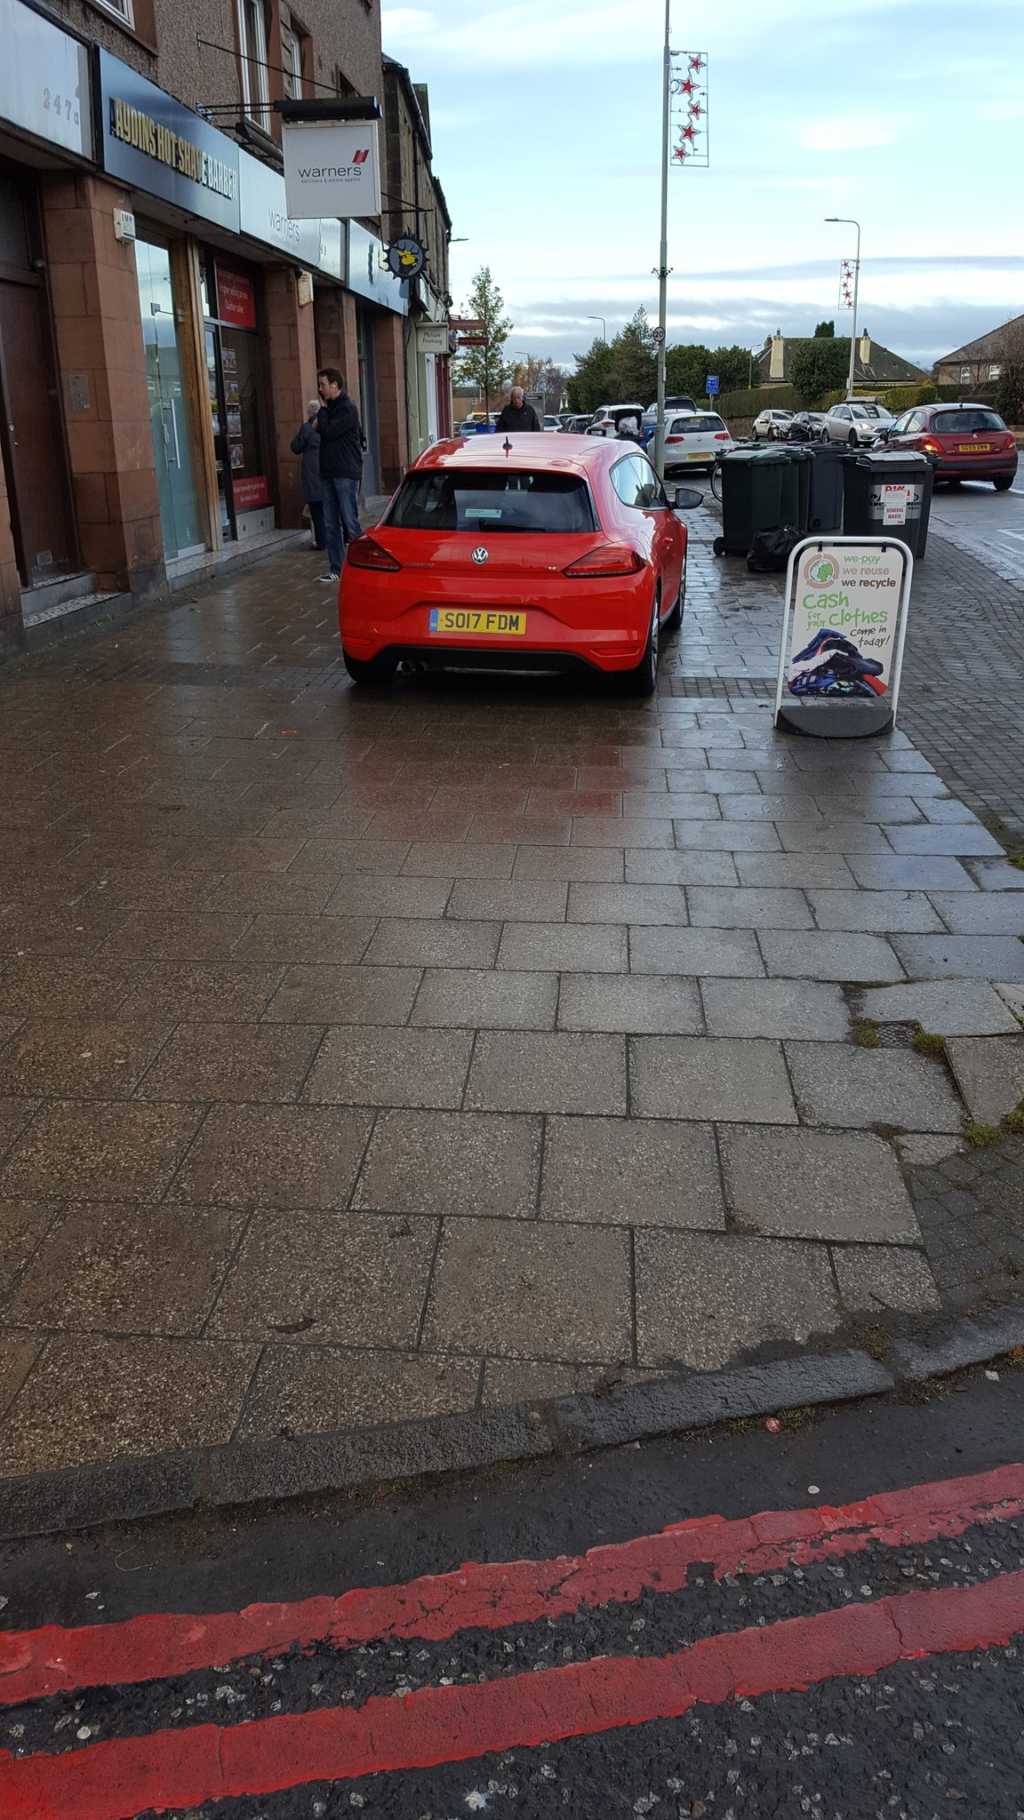 SO17 FDM displaying Inconsiderate Parking